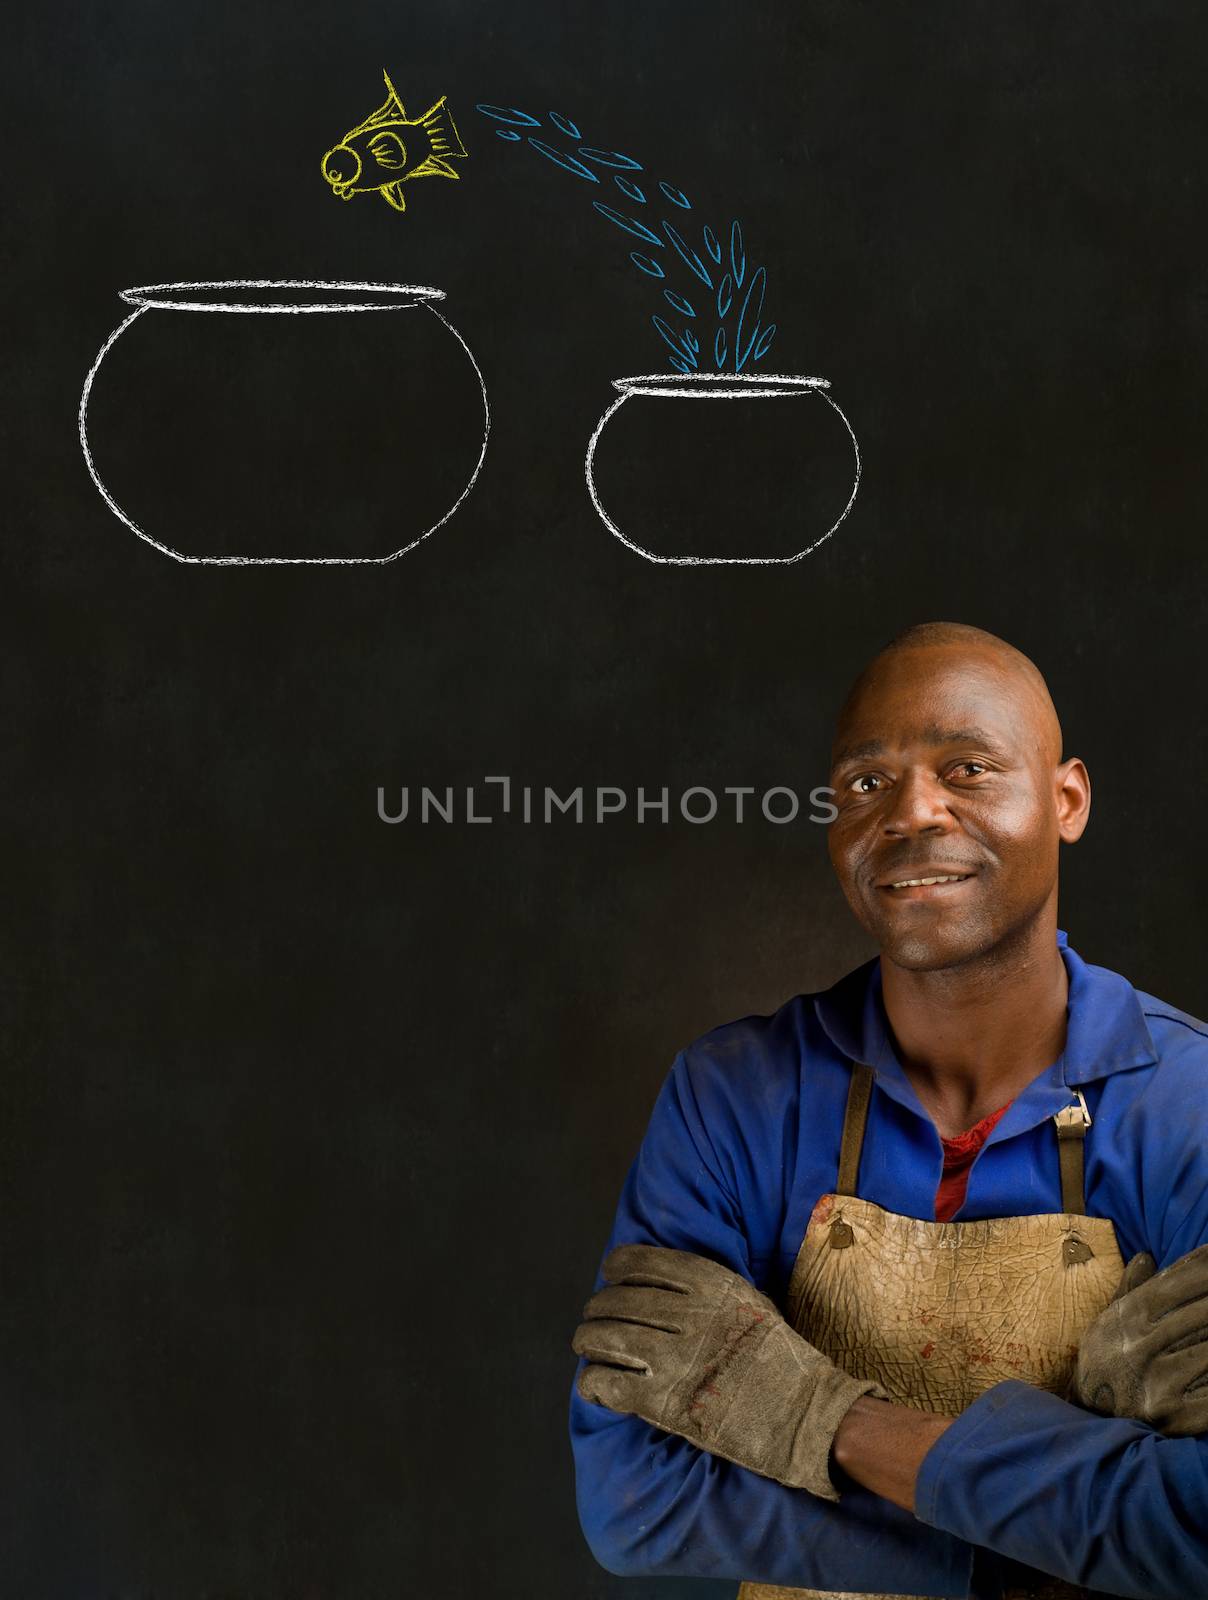 African American black man industrial worker with chalk jumping fish bowls on a blackboard background